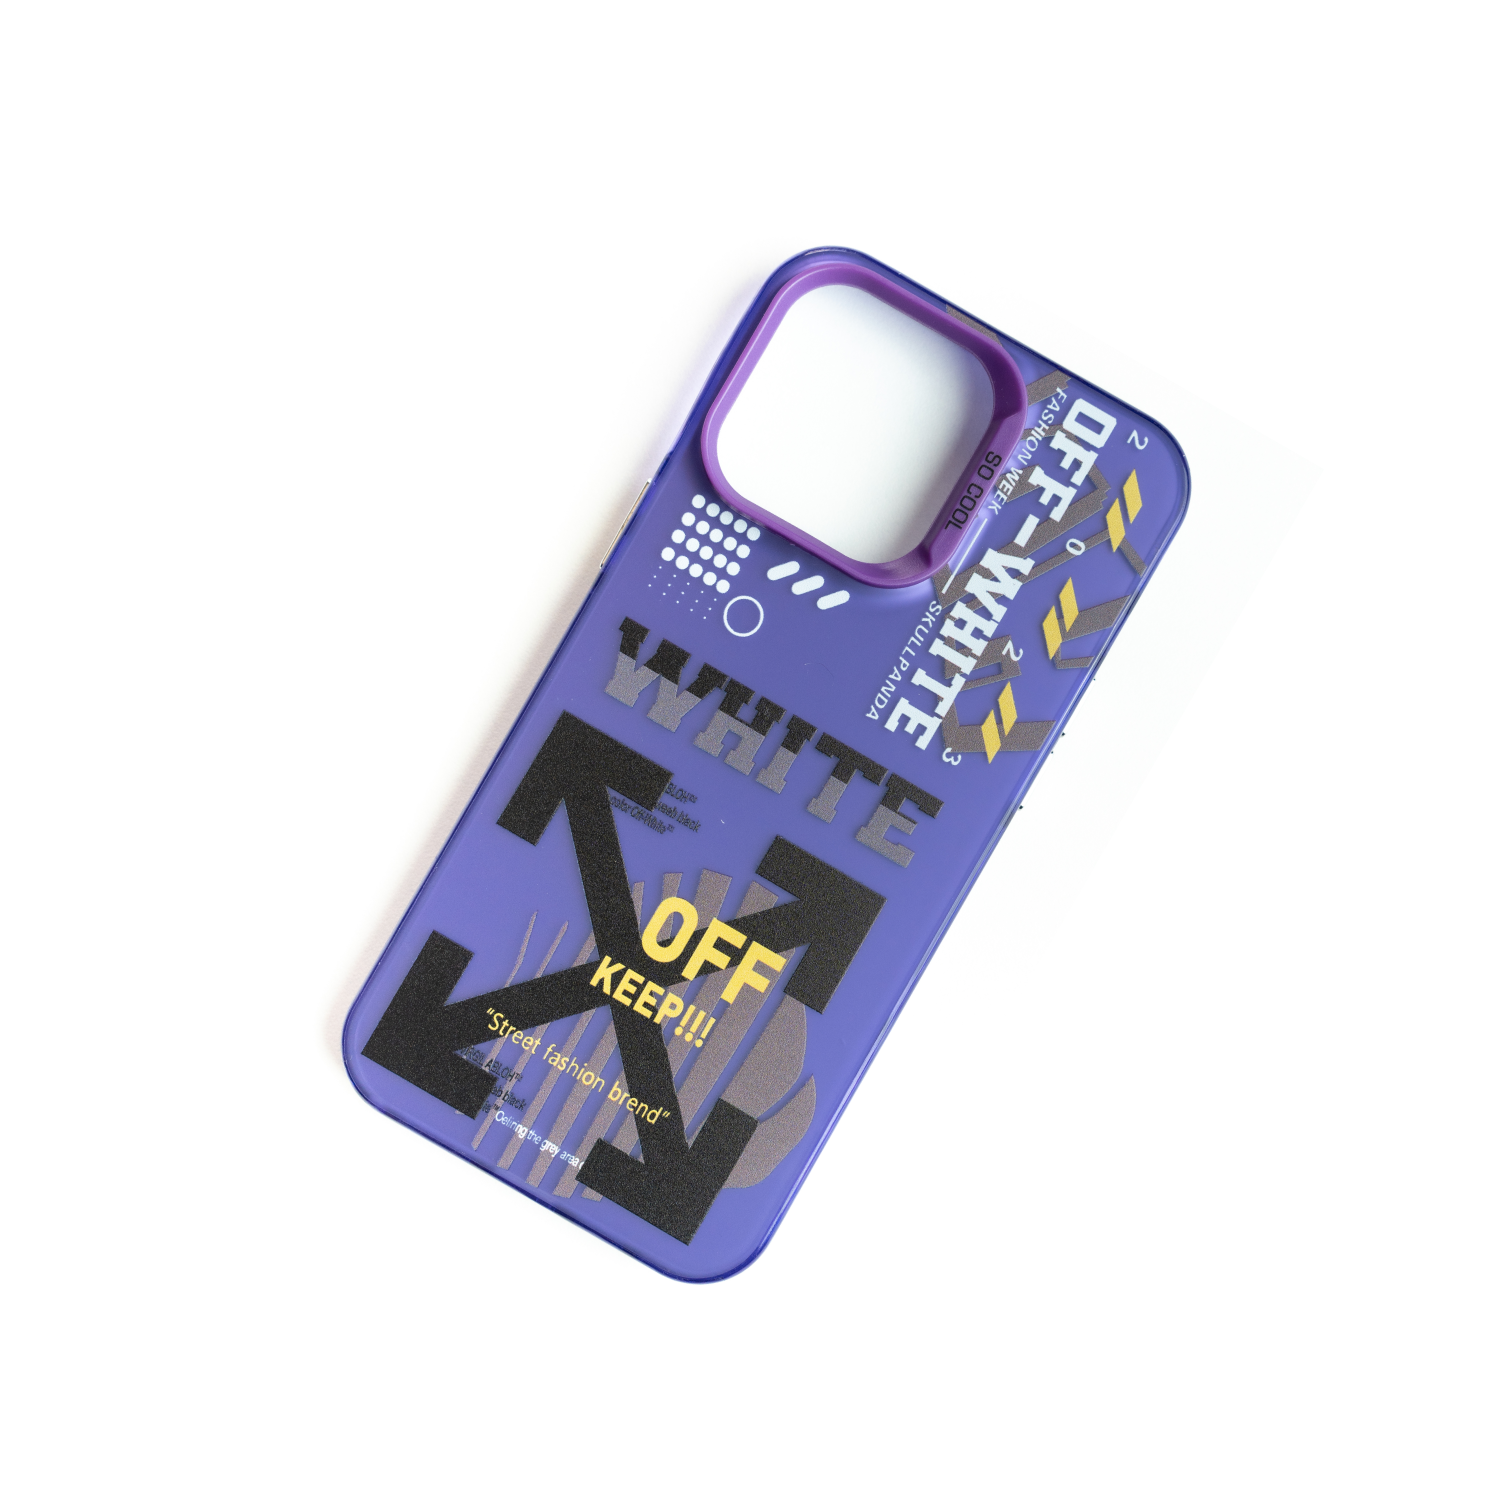 Off White Purple - Iphone Case - Cult Collection